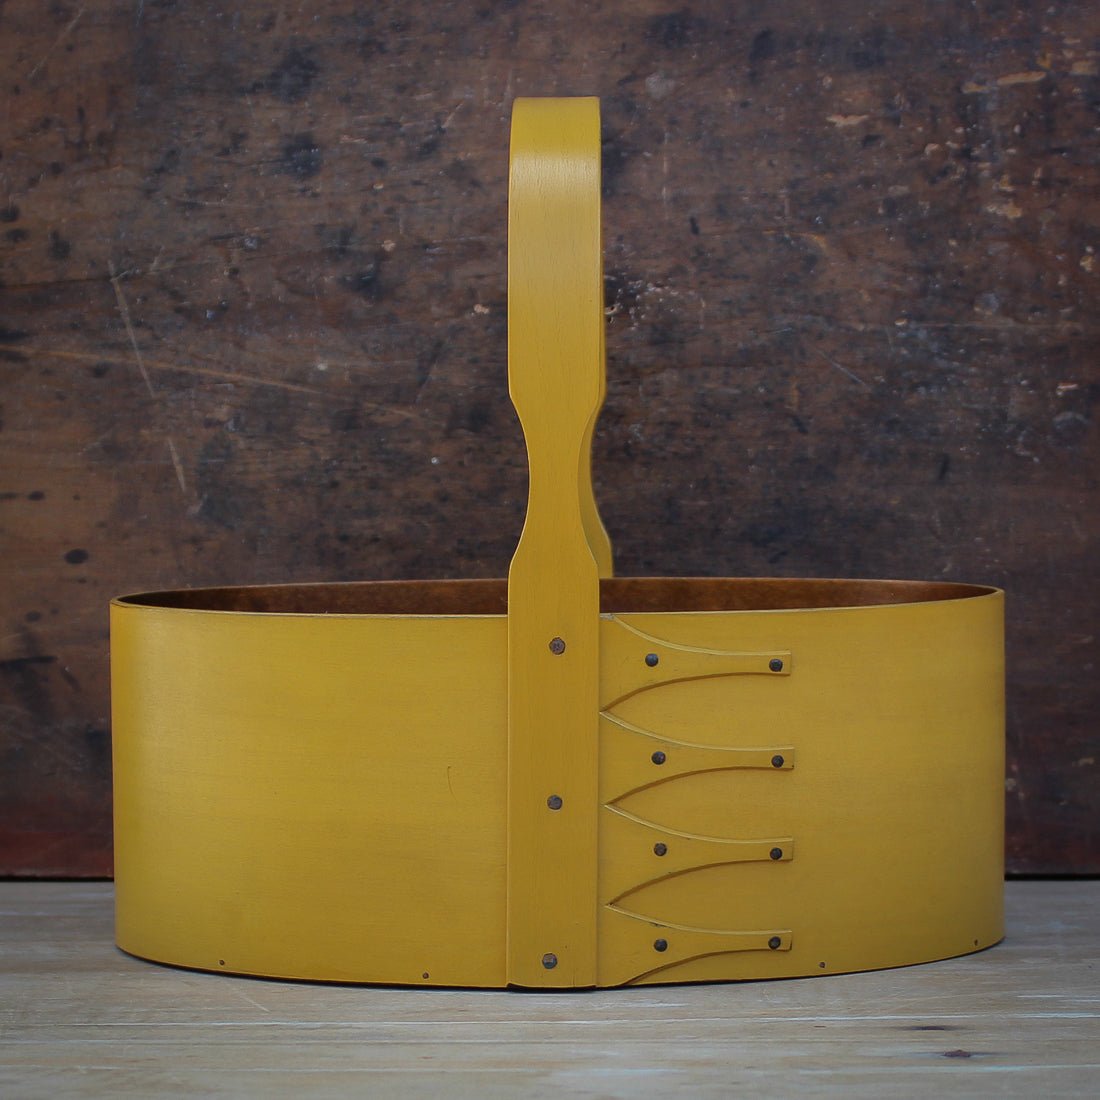 Shaker Carrier, Size #6, LeHays Shaker Boxes, Handcrafted in Maine, Yellow Milk Paint Finish, Front View